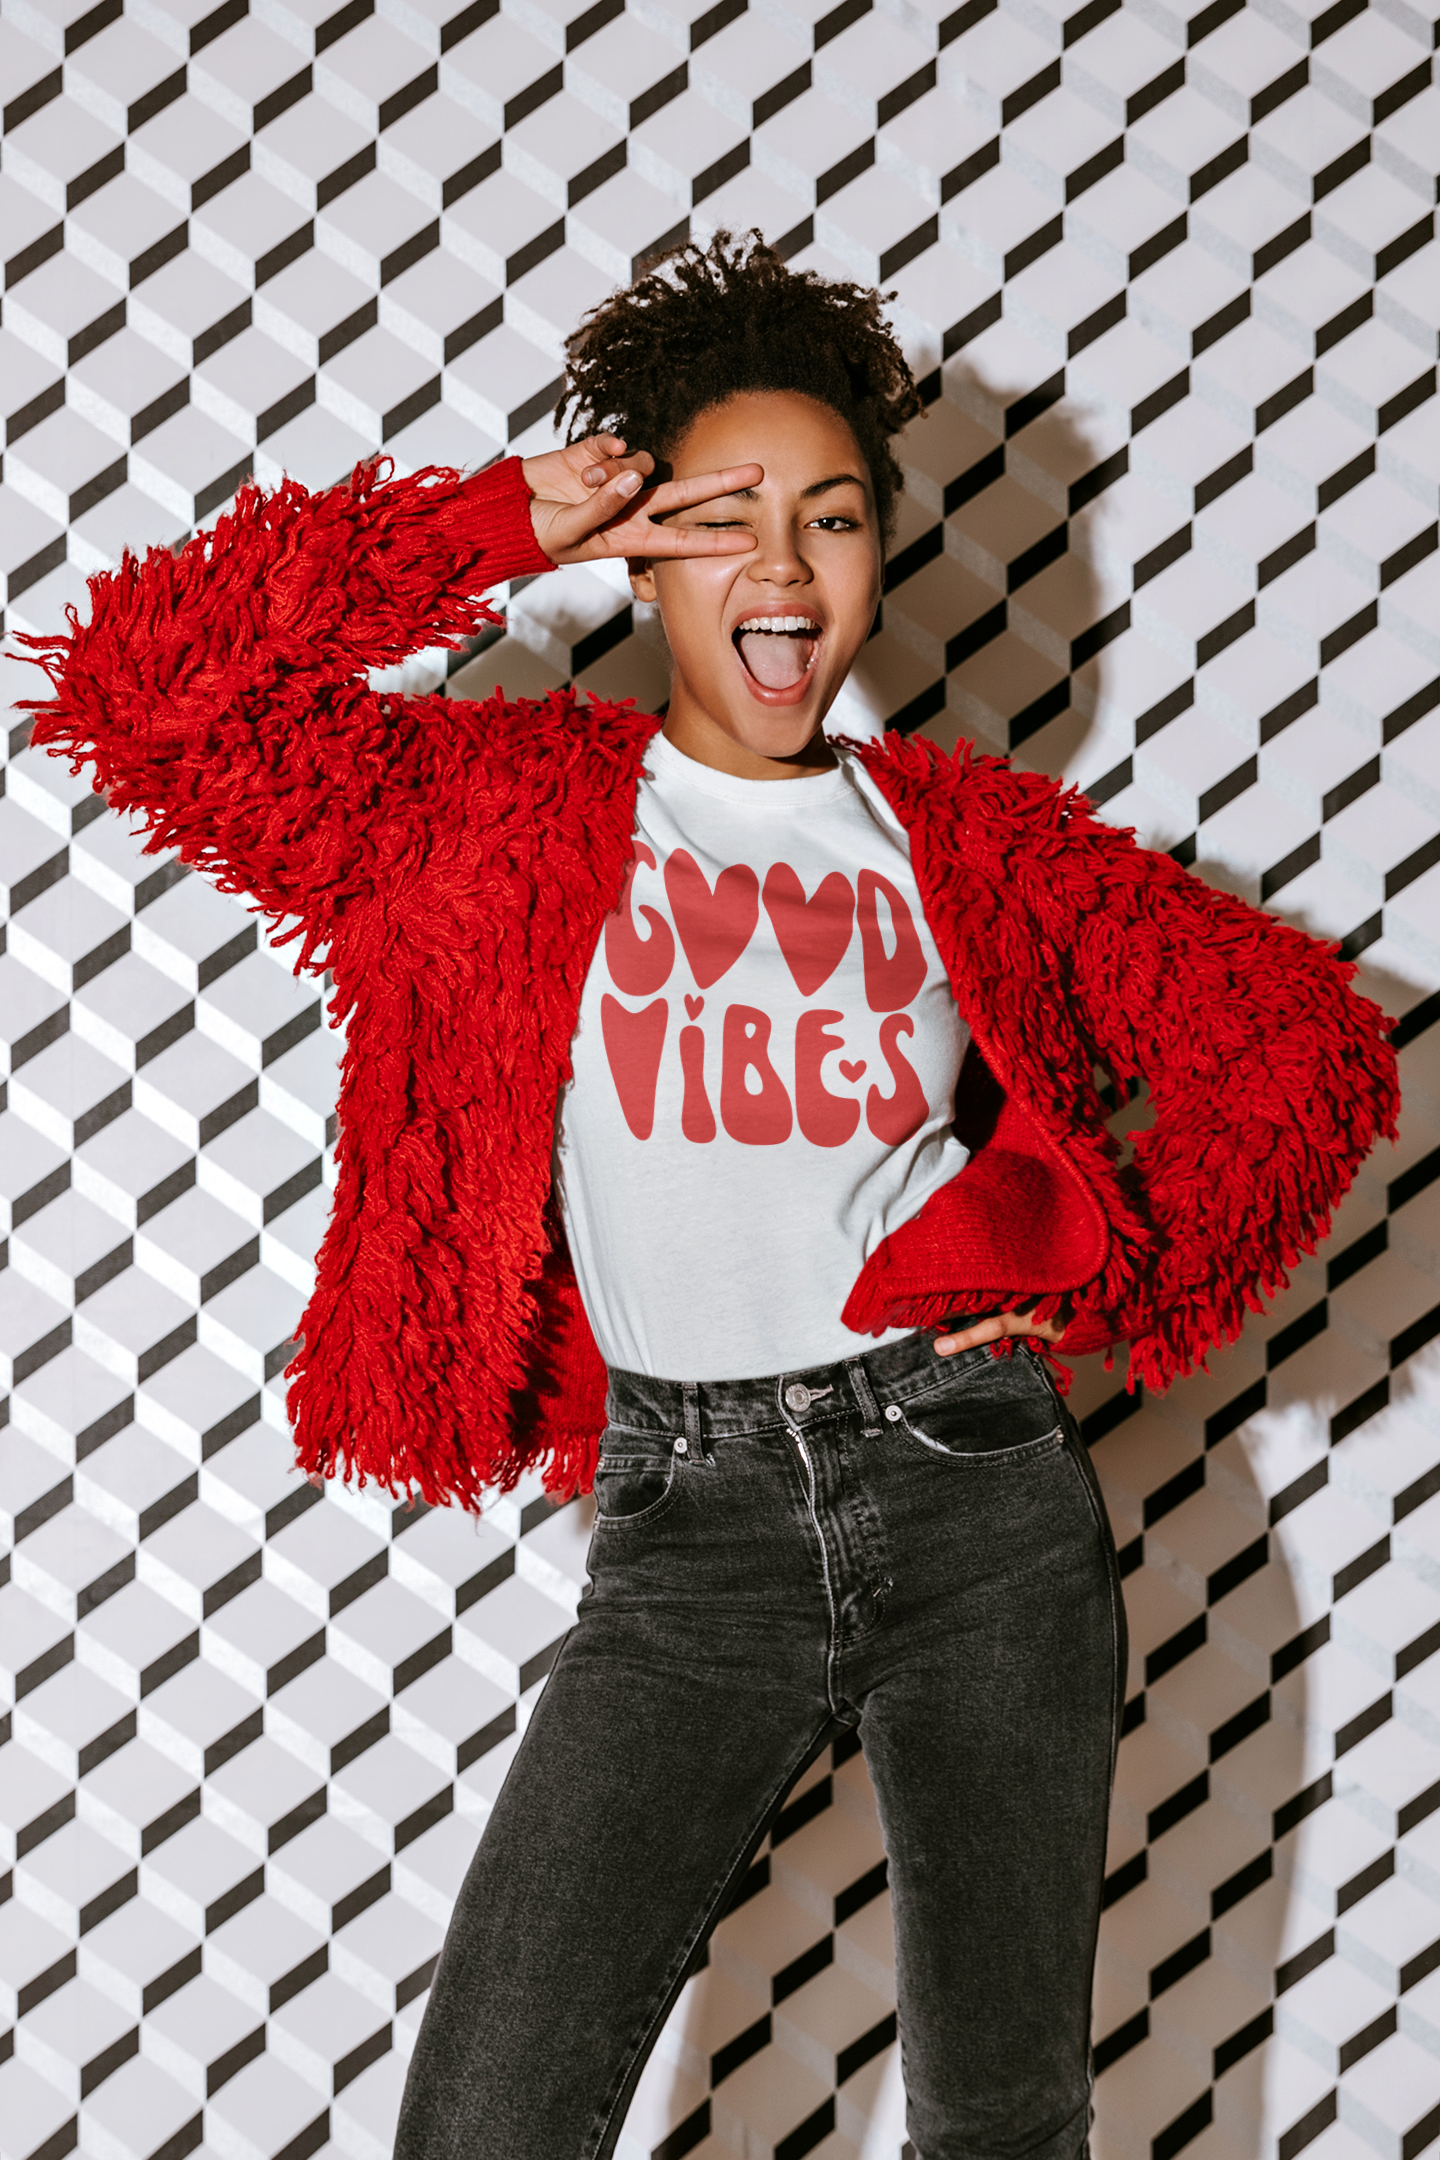 A woman wearing a Good Vibes Red Tee by Sharp Tact Kreativ | Tees & Gifts with Encouraging Messages to Brighten Your Day with a Bit of Wit, posing for a photo, radiating good vibes.